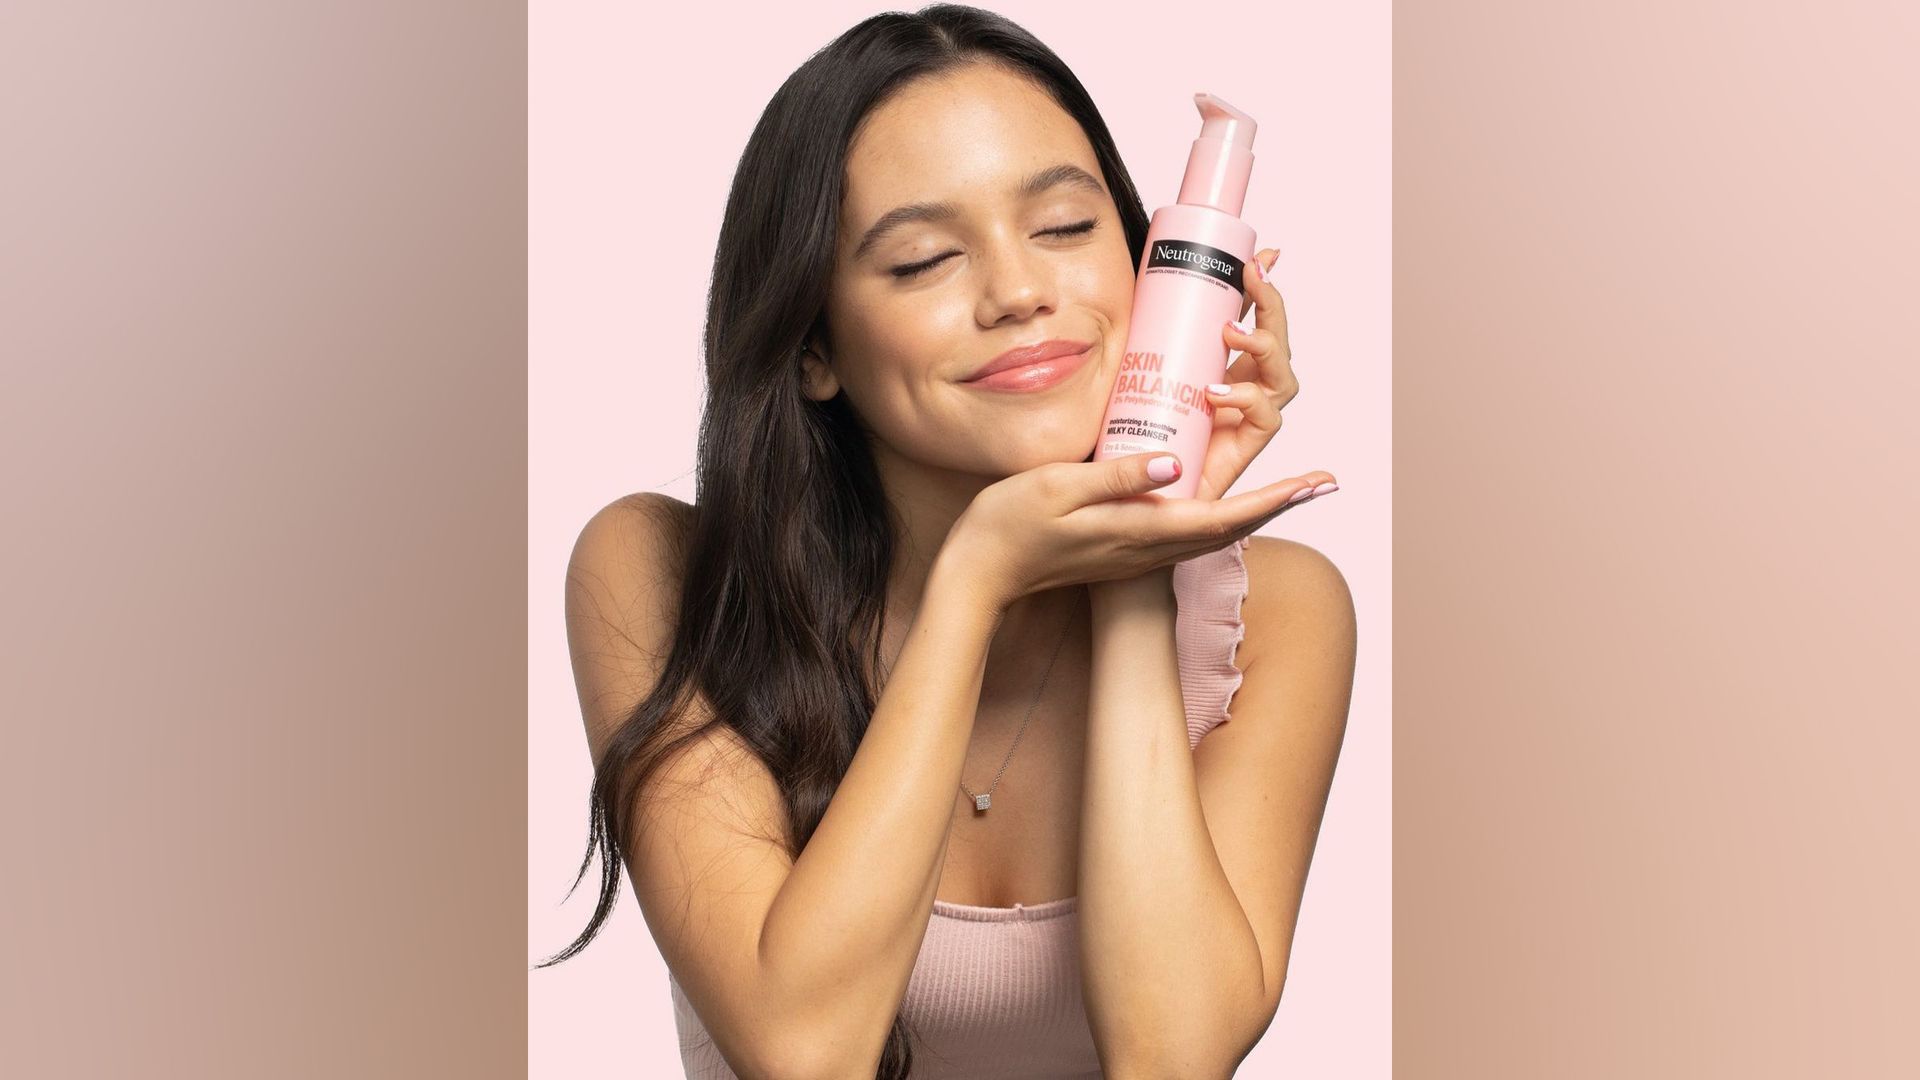 The actress in Neutrogena ad